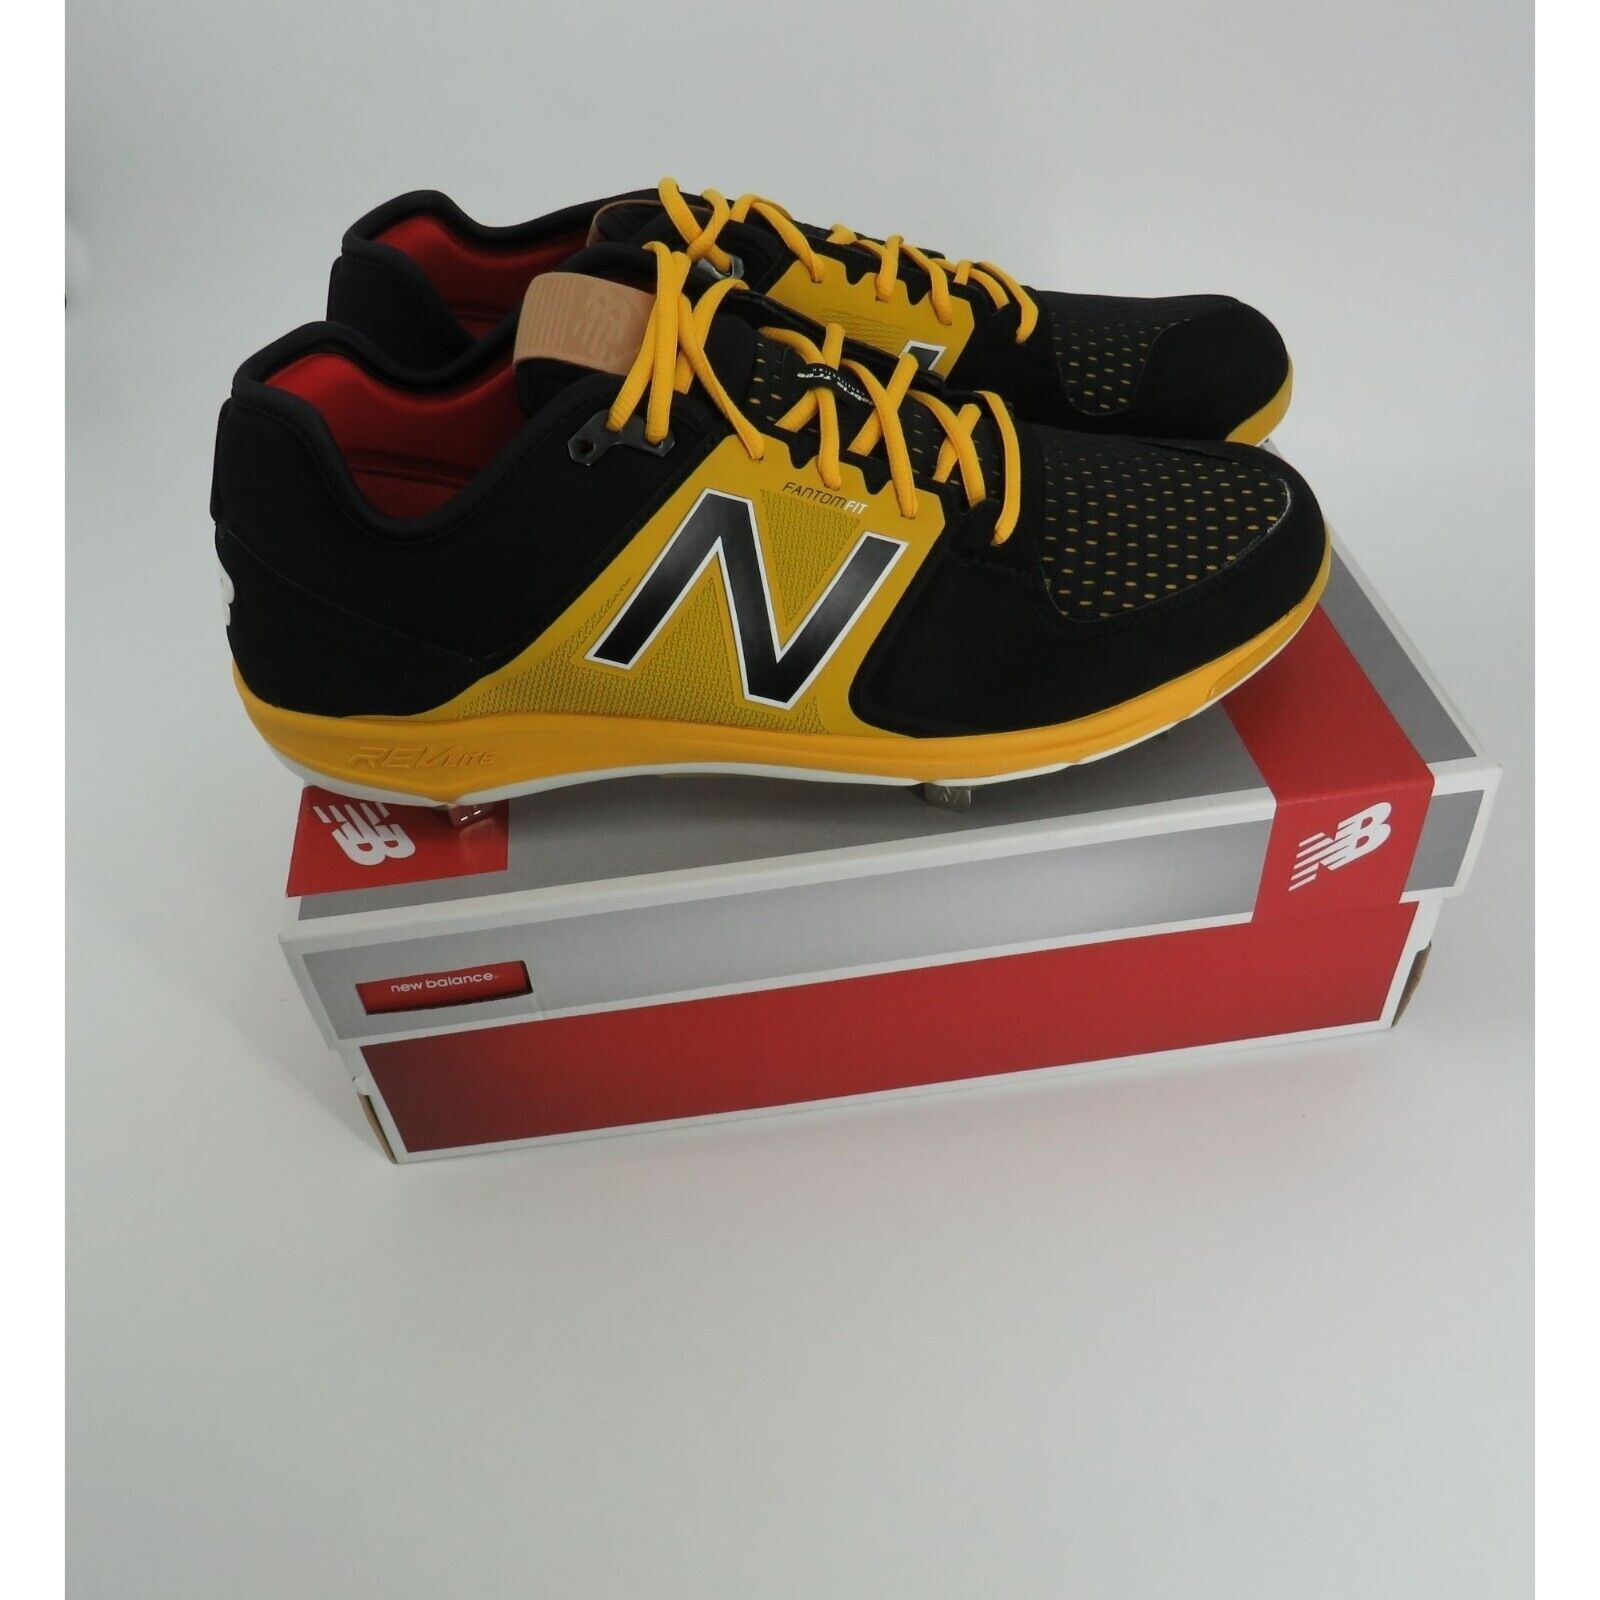 New Balance 3000 Mens Baseball Shoes Metal Cleats Black Yellow 16D New With Box - $44.55